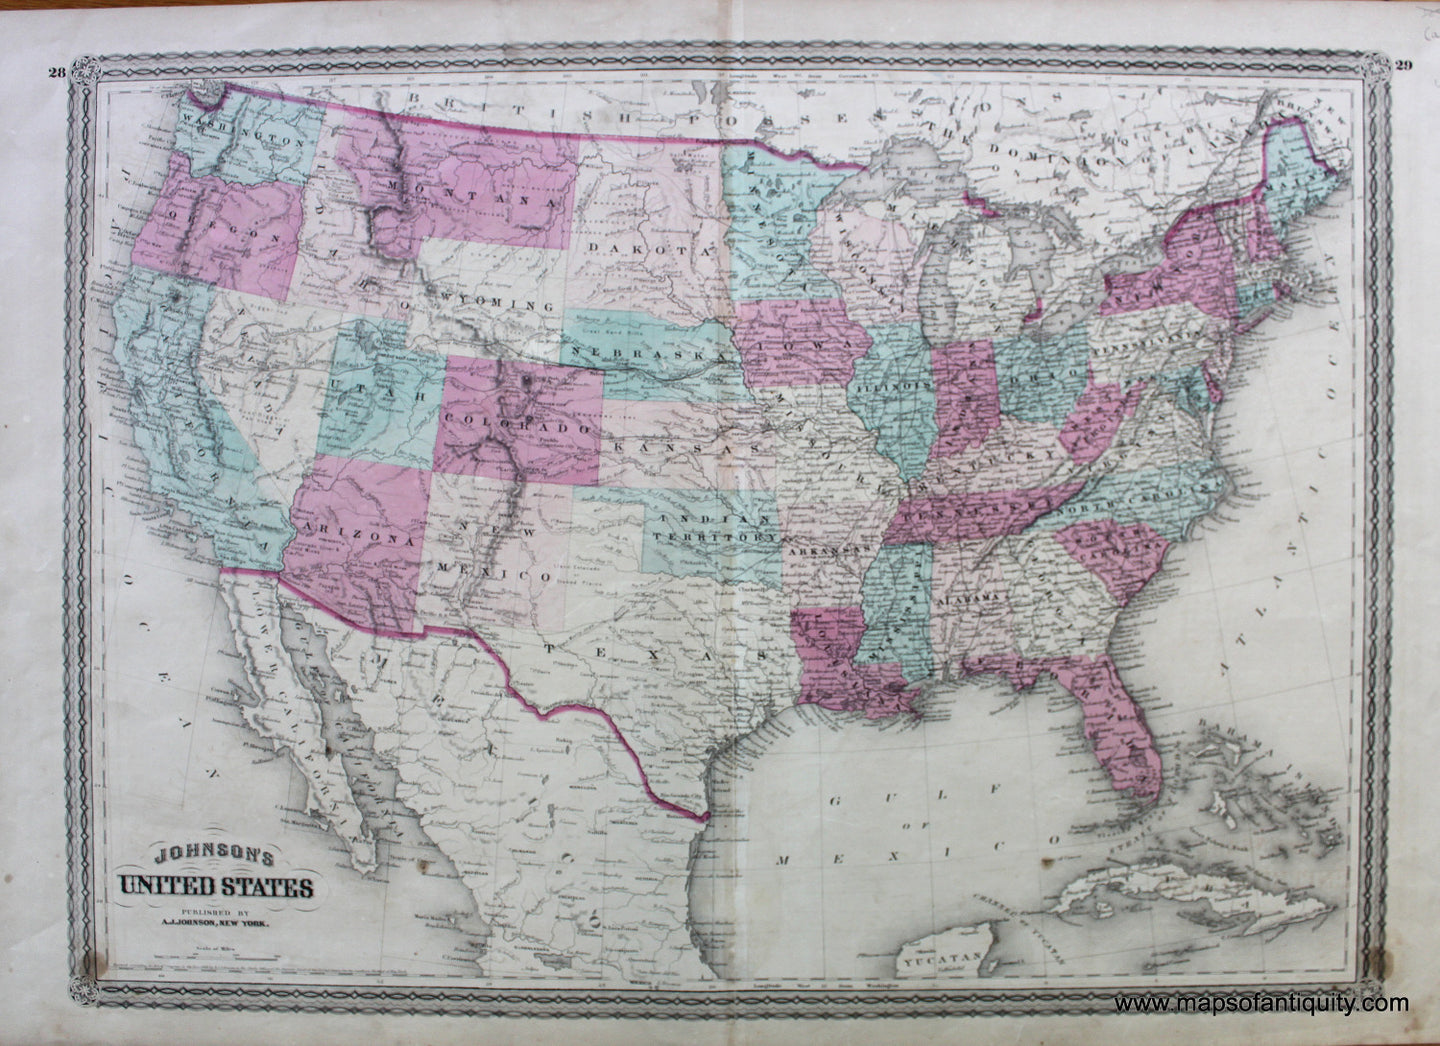 Antique-Hand-Colored-Map-Johnson's-United-States-United-States--1870-Johnson-Maps-Of-Antiquity